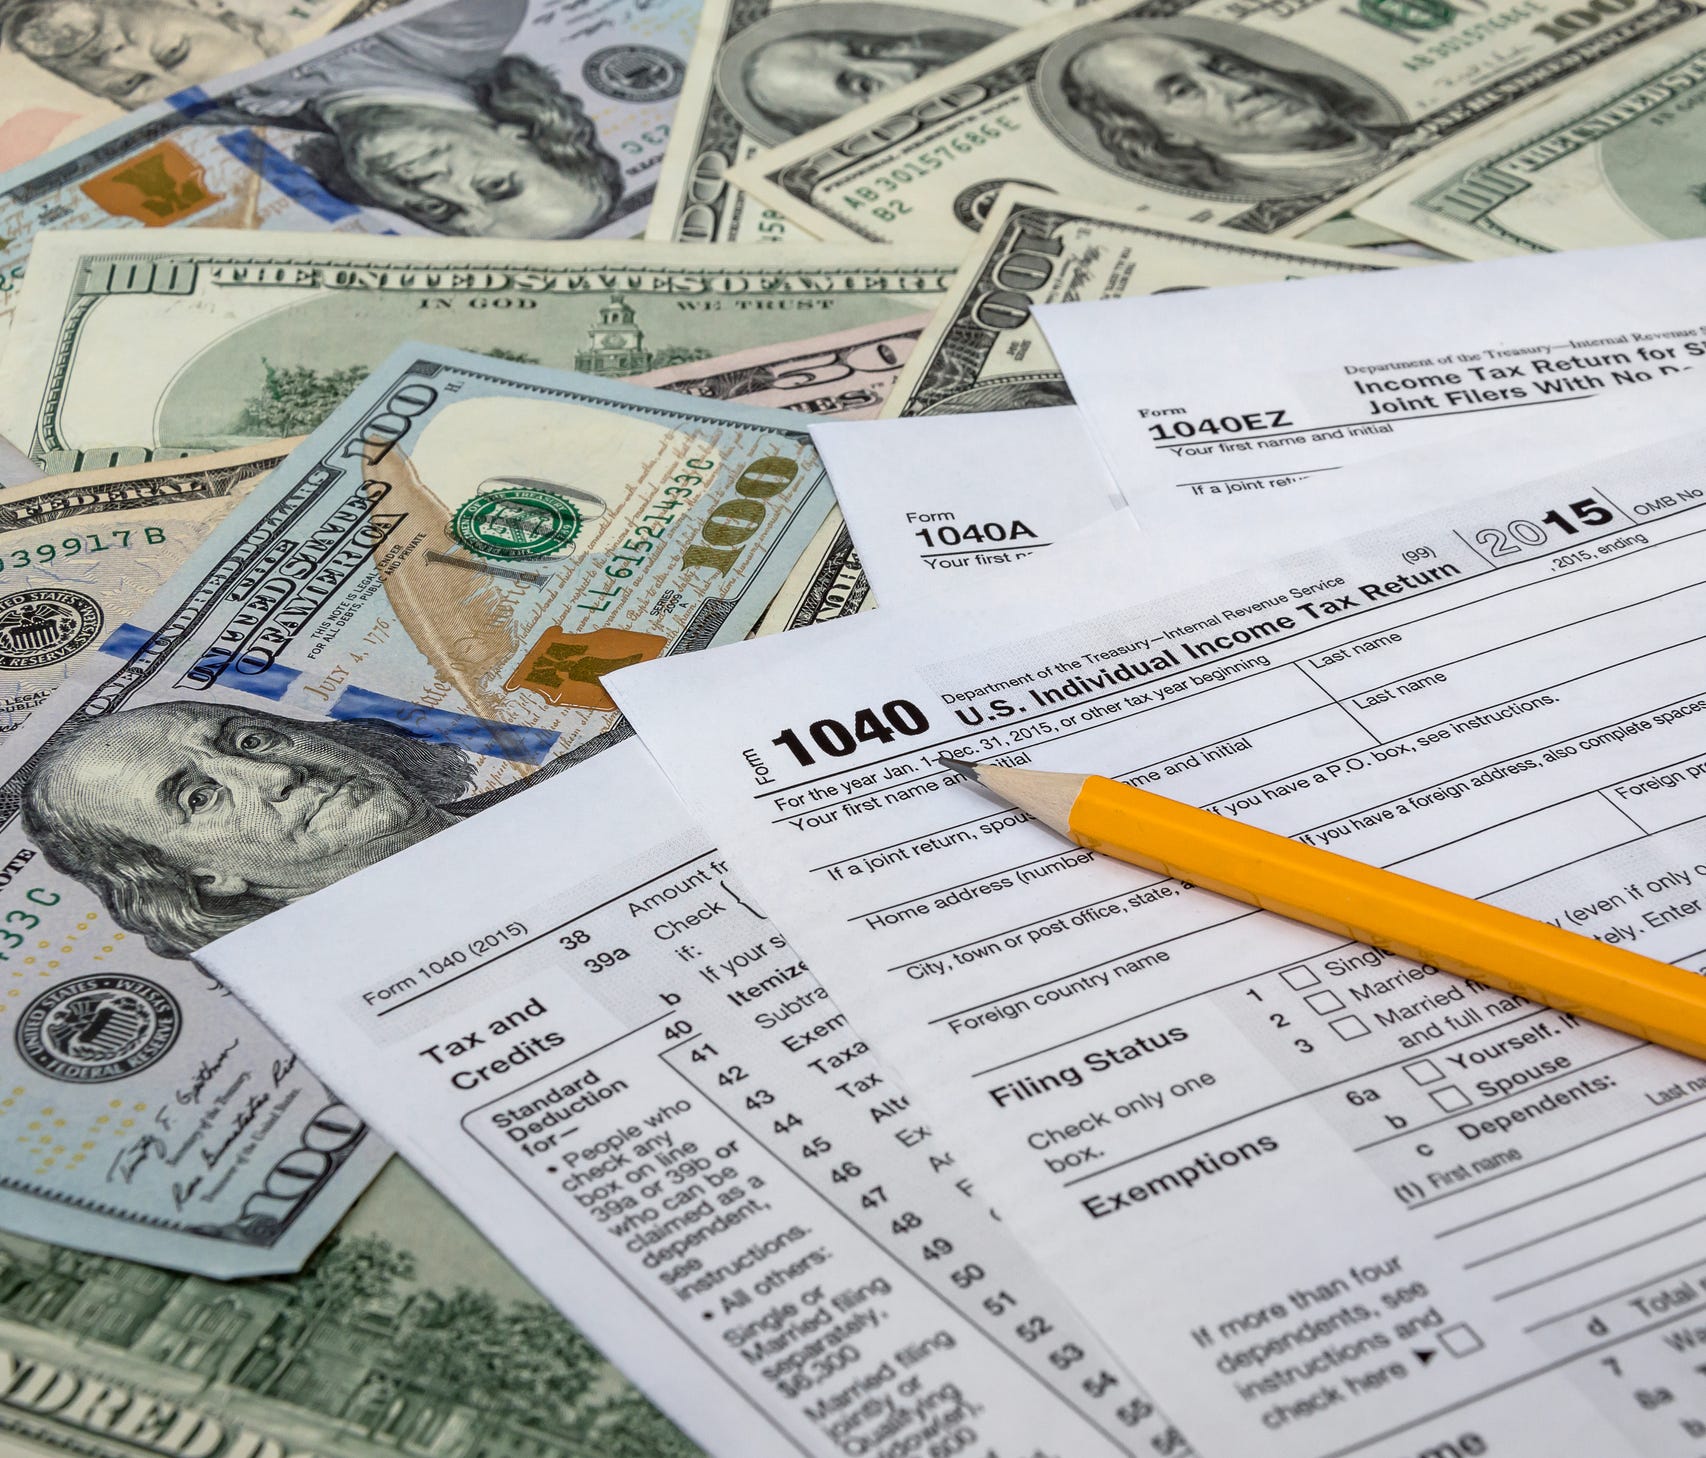 There are several smart options for how you should use your tax refund.